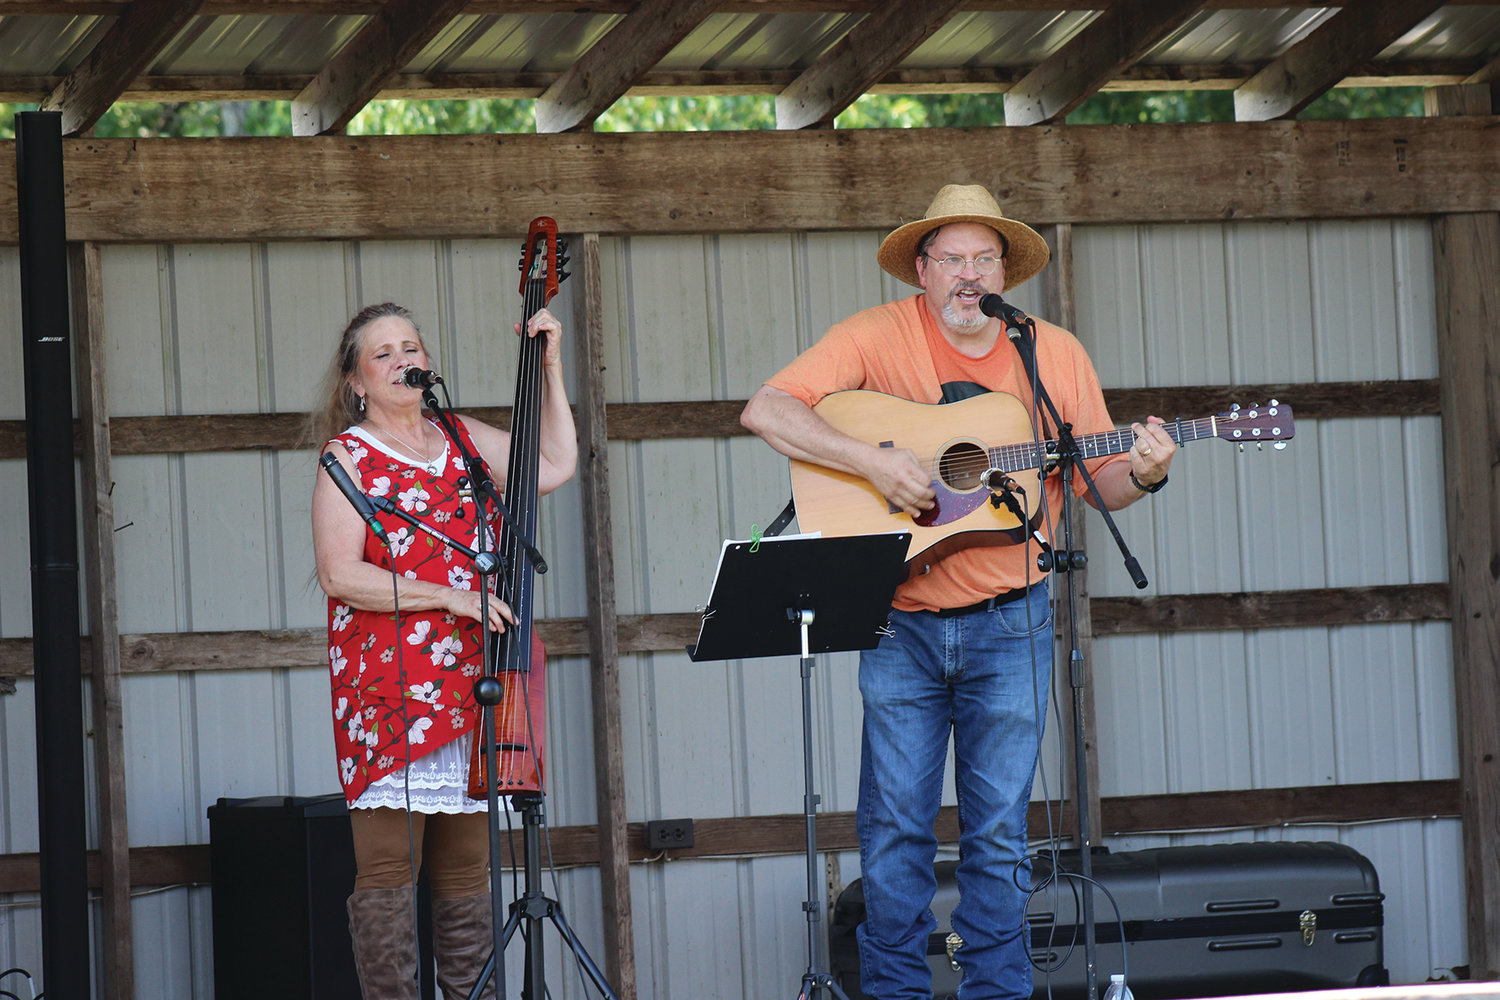 The Mayfields portion of the group Red Bridge opened the 53rd Annual Vanzant Picnic on Friday, July 10 as the two-day event featured several groups on stage providing entertainment for the crowd.